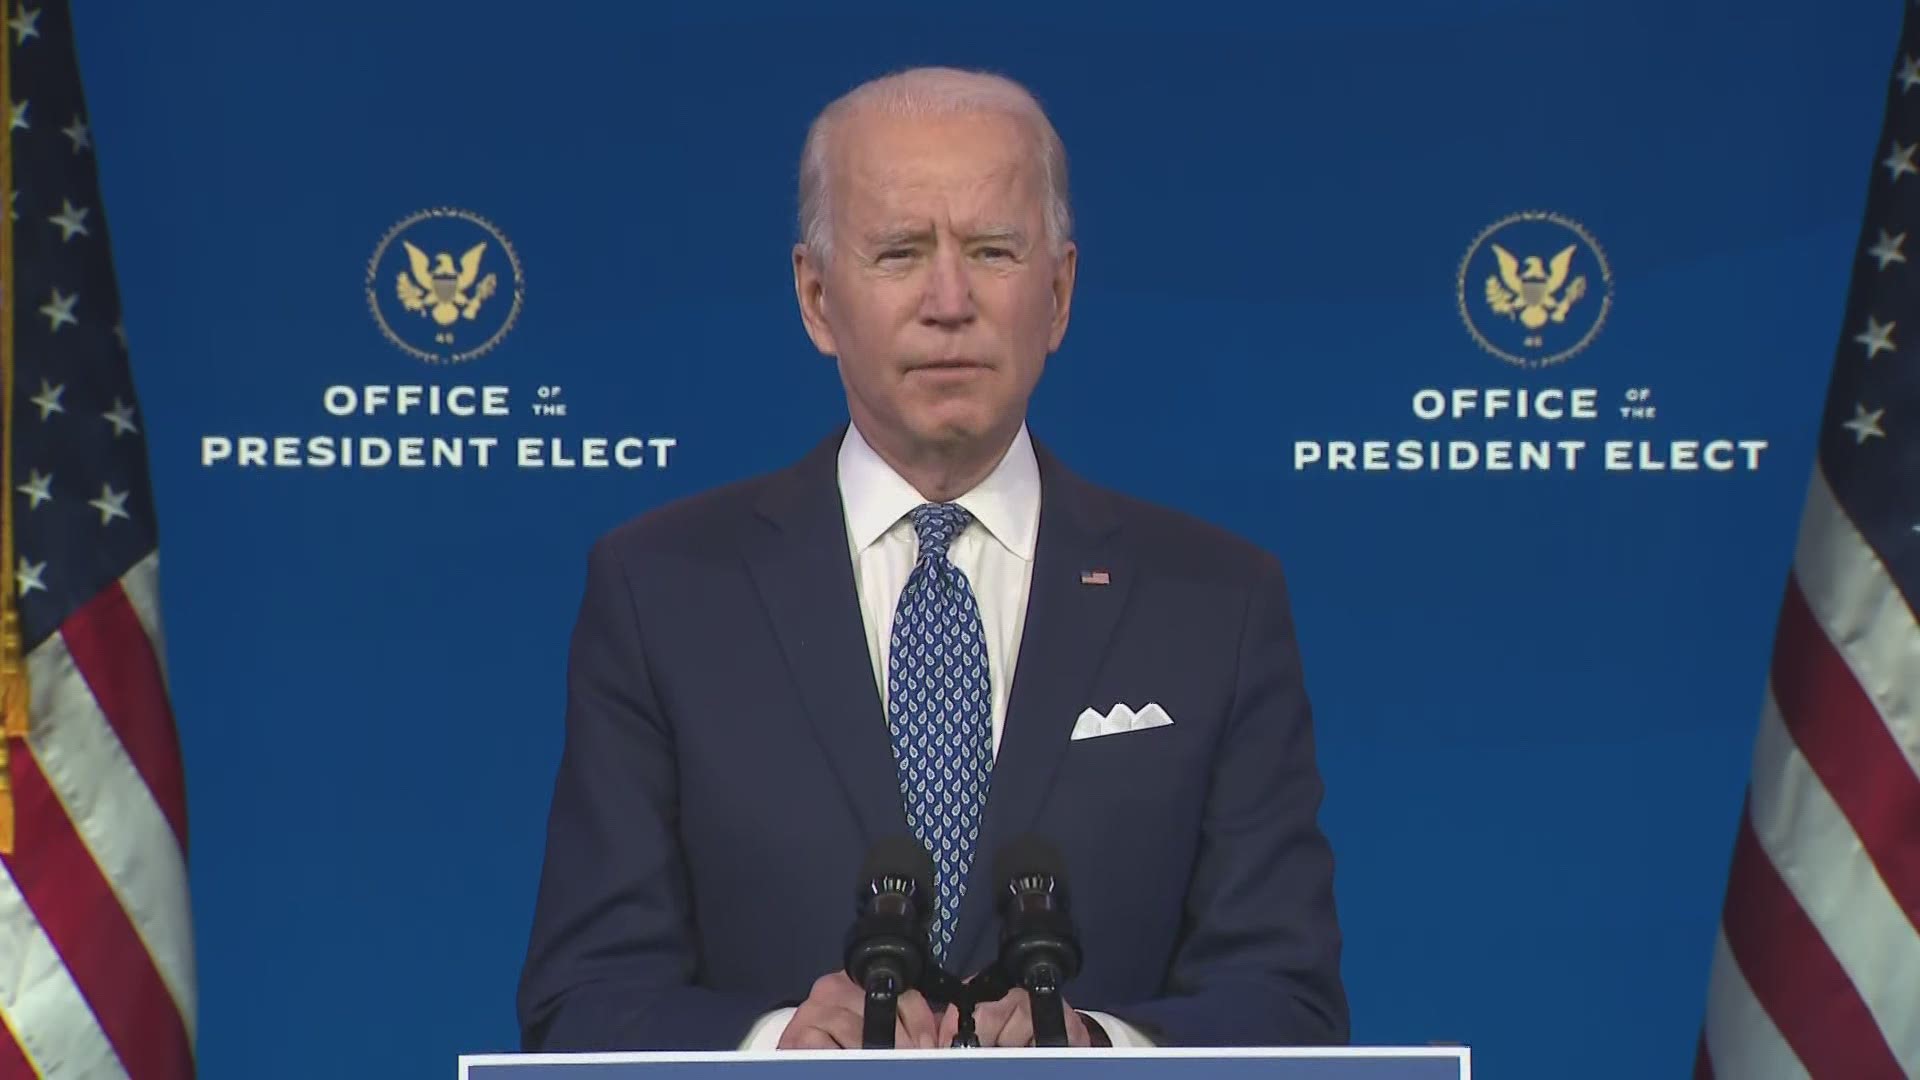 President-elect Joe Biden addressed the ahead of the Christmas holiday. Biden reflected on the past year and the challenges that still lie ahead.